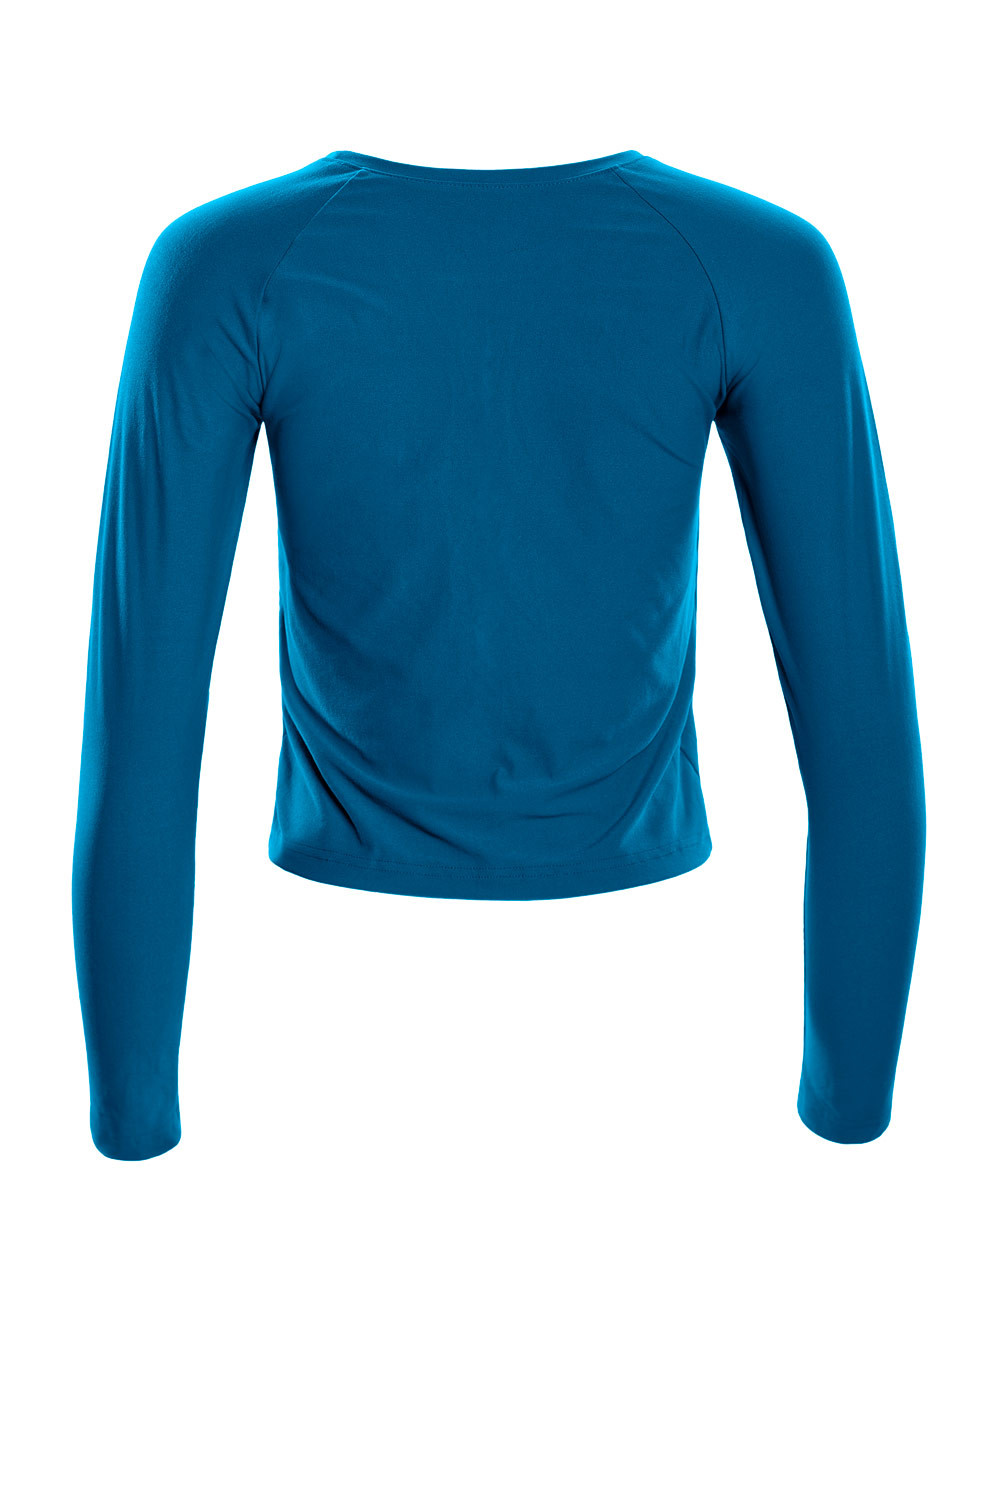 Functional Light and Soft Cropped Long Sleeve Top AET119LS, teal green,  Winshape Ultra Soft Style